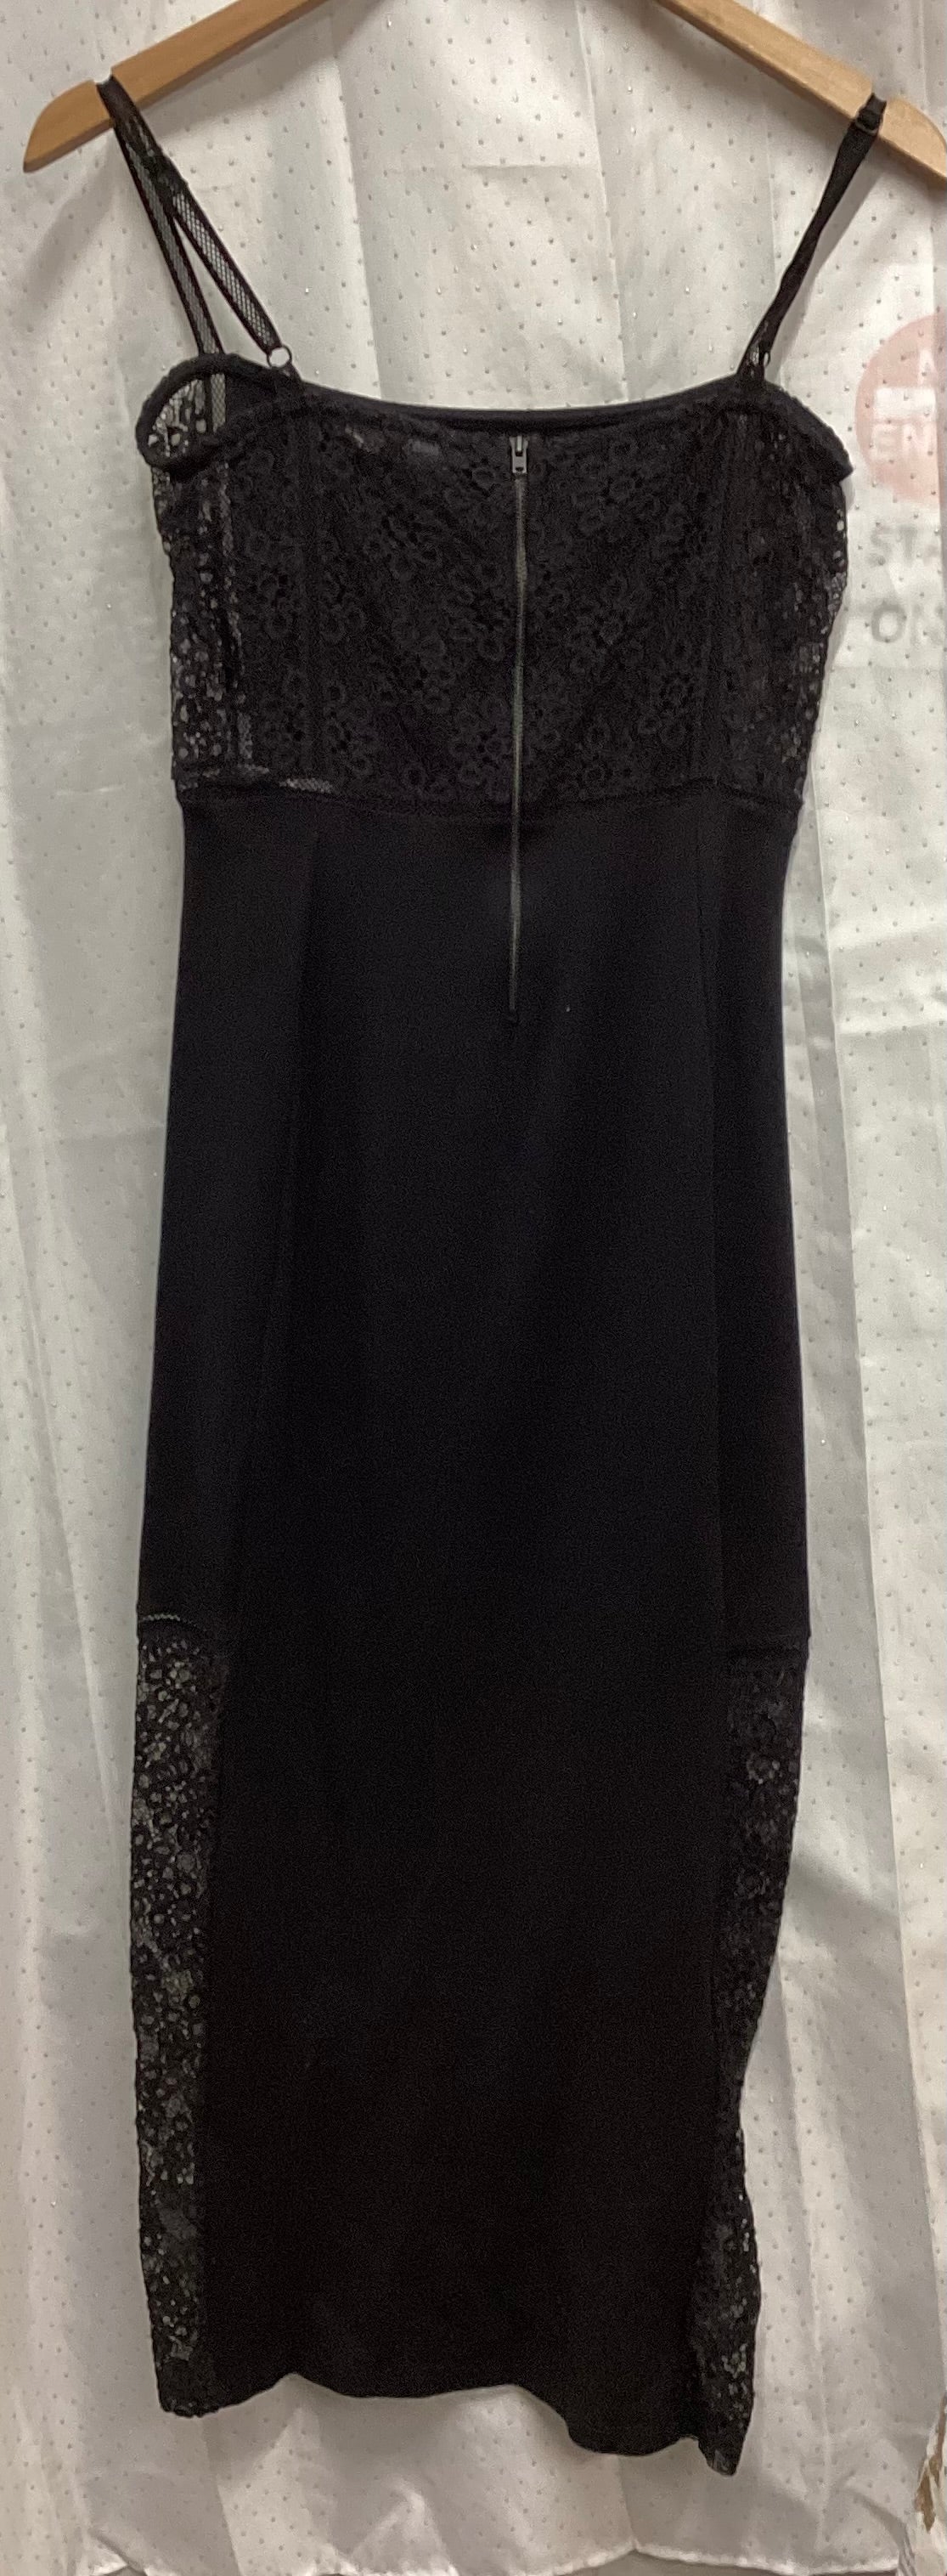 French Connection Size 10 LongLine Black Dress with Lace Detail